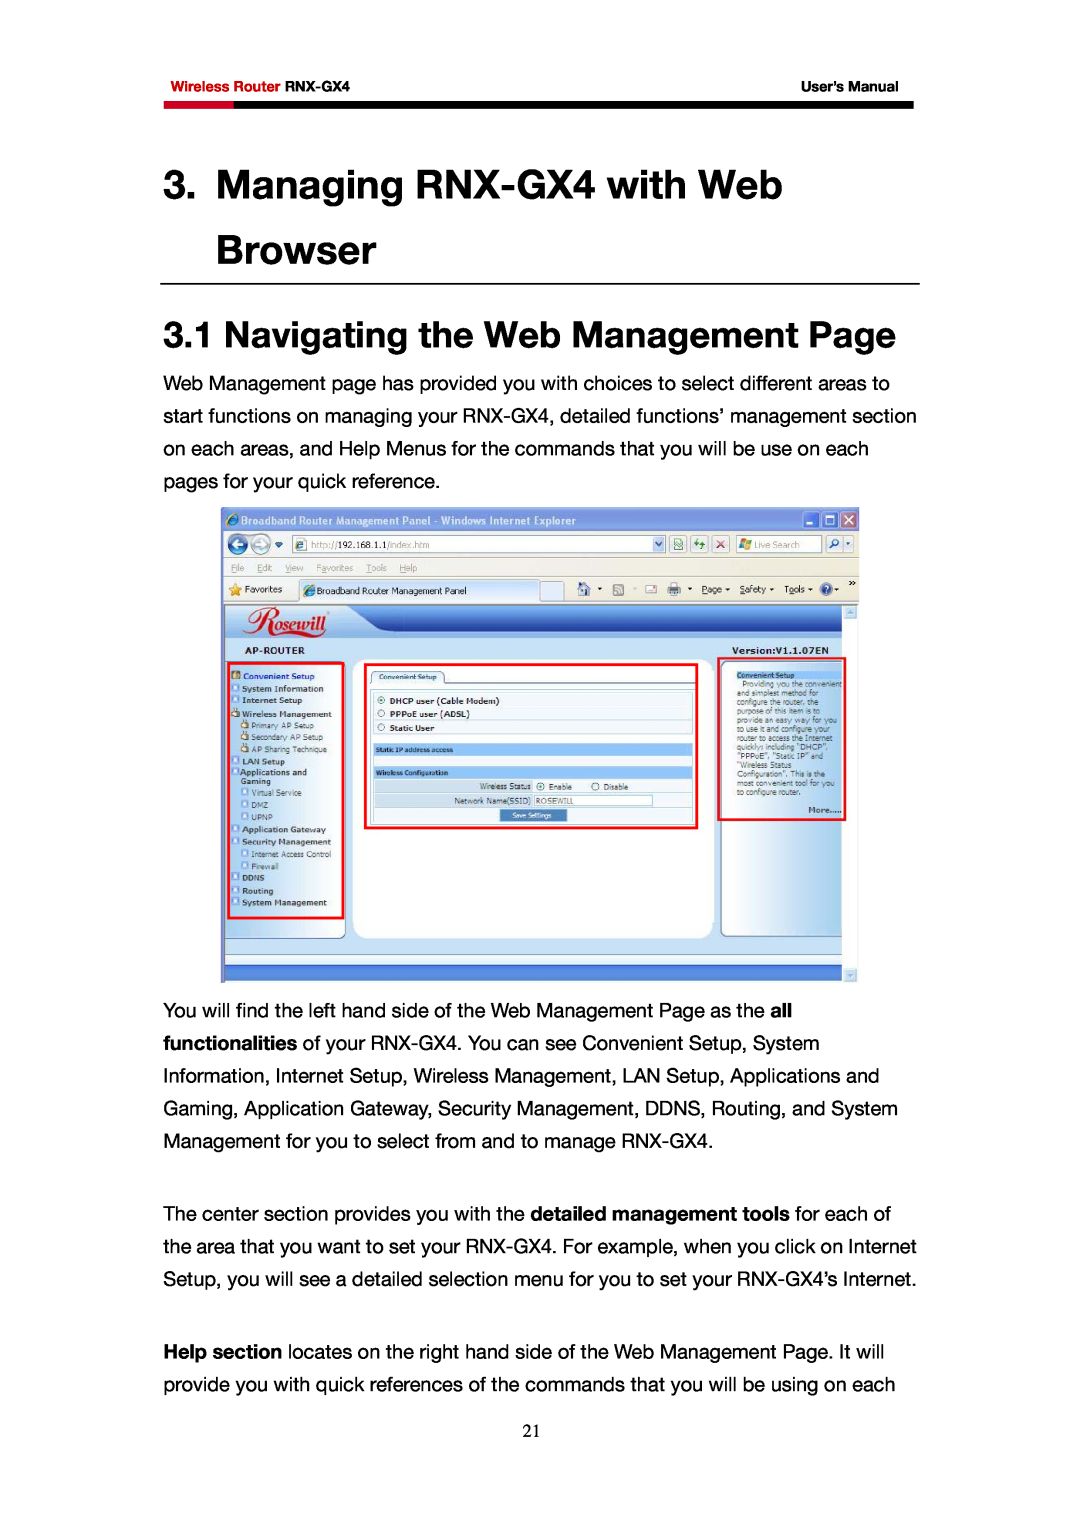 Rosewill user manual Managing RNX-GX4 with Web Browser, Navigating the Web Management Page 